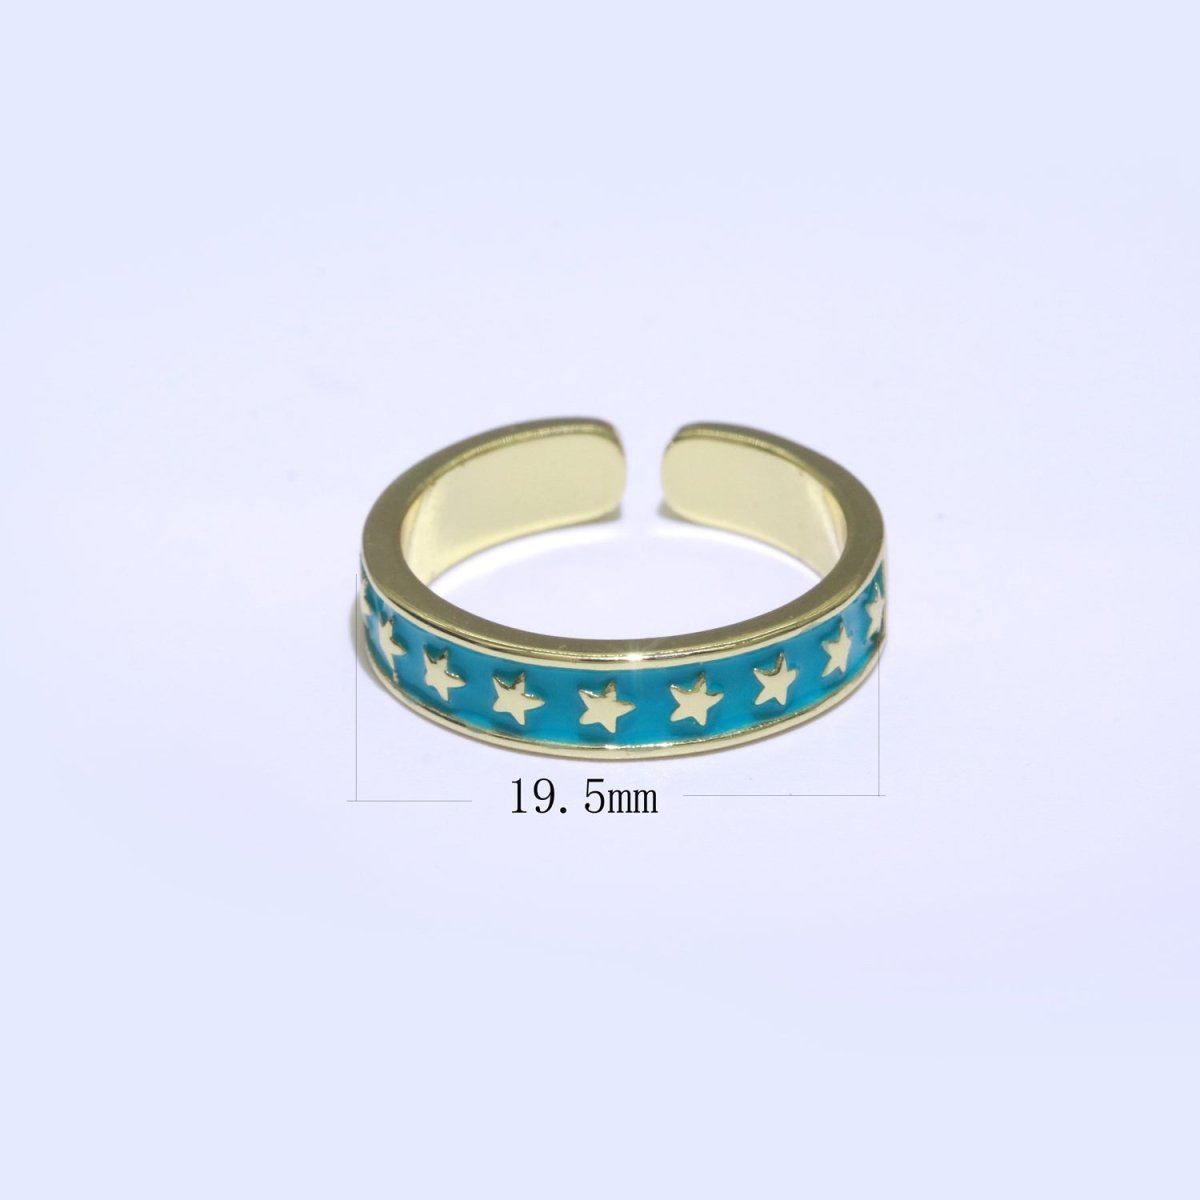 1x Dainty Colorful Enamel Ring Multicolor Star Band Spade Ring Stacking Open Ring Adjustable Ring Yellow Teal Pink Green White Neon Ring O-403 ~ O-410 - DLUXCA